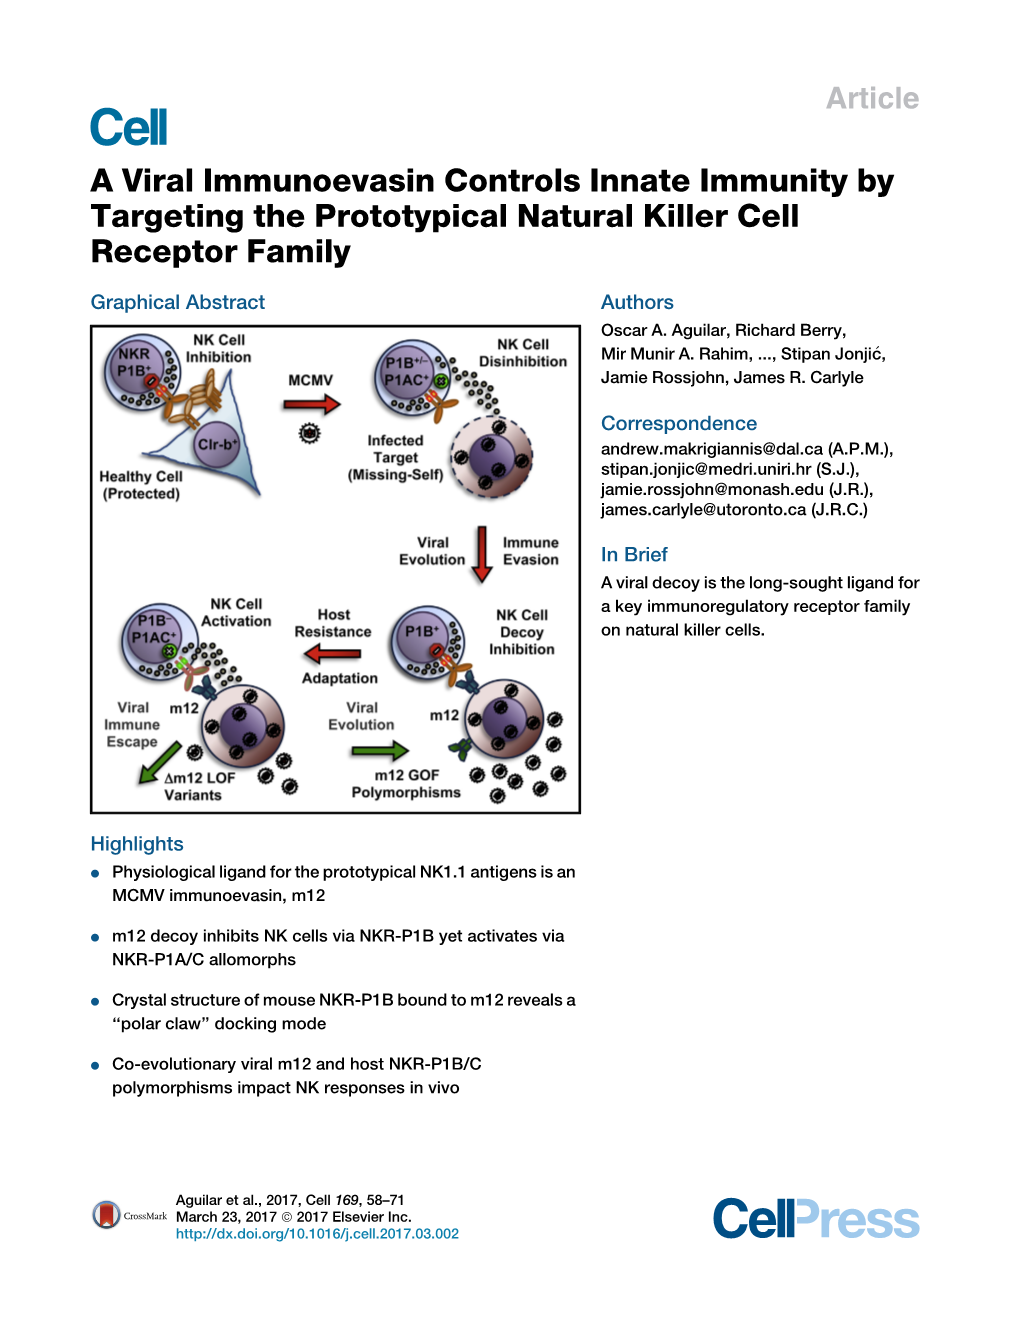 A Viral Immunoevasin Controls Innate Immunity by Targeting the Prototypical Natural Killer Cell Receptor Family